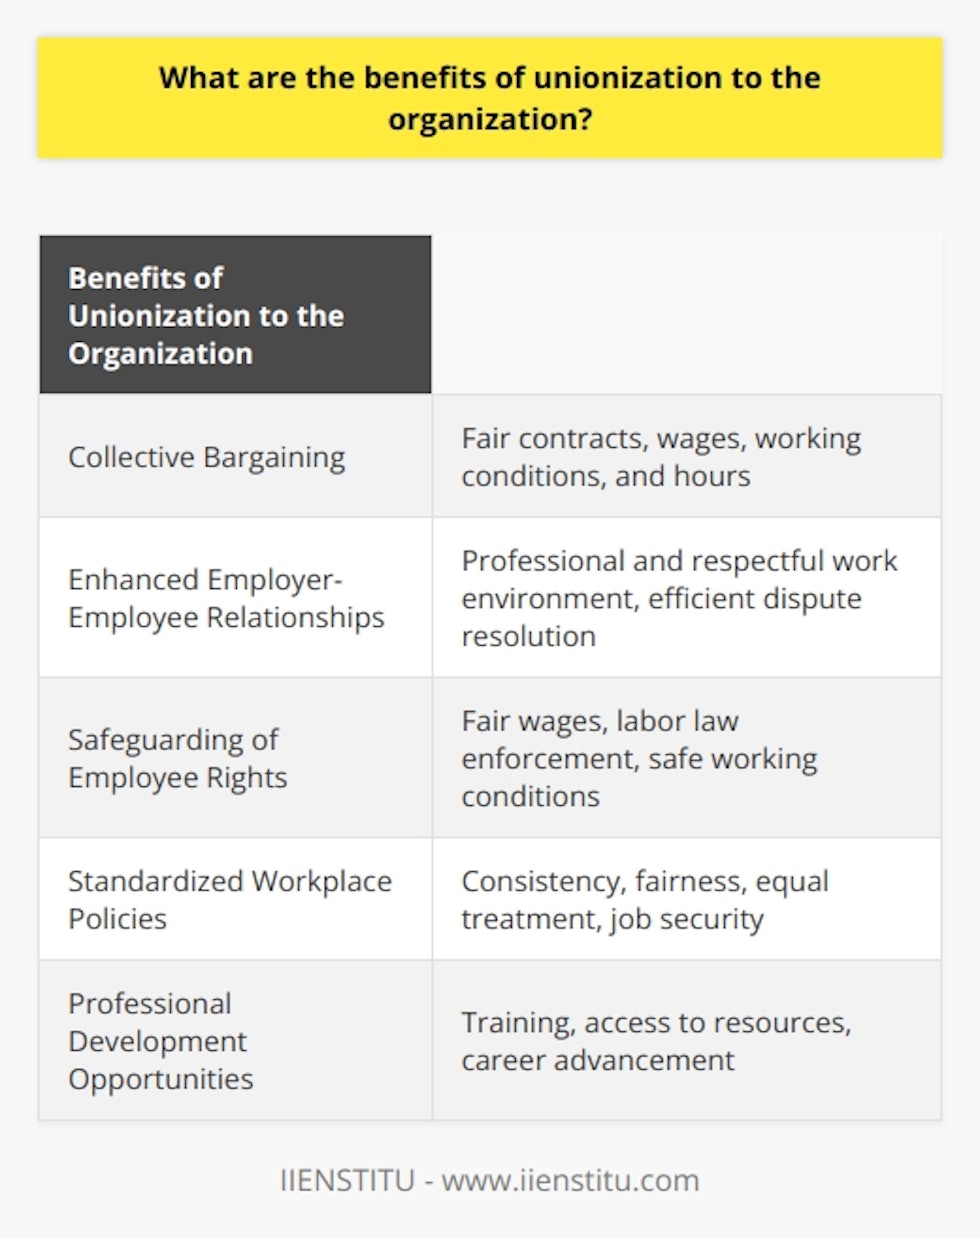 Unionization brings several benefits to an organization, one of which is collective bargaining. This gives employees the power to negotiate contracts, wages, working conditions, and hours directly with the organization. This leads to a fairer agreement, labor stability, increased morale, productivity, and reduced turnover rates. Union representation also enhances employer-employee relationships by creating a more professional and respectful work environment. Unions provide a platform for employees to voice concerns and grievances, leading to efficient resolution of disputes. This fosters an open and transparent work culture, promoting trust, job satisfaction, and optimal performance among workers.Unions also safeguard employees' rights by ensuring fair wages, labor law enforcement, and safe working conditions. This reduces the potential for workplace conflicts and costly legal battles, protecting the organization's reputation.Through unionization, organizations can develop standardized workplace policies that promote consistency, fairness, and equal treatment for all employees. These policies address critical issues like job classifications, promotions, and grievance handling, promoting job security and eliminating disparities and discrimination.Unions often provide professional development opportunities such as training and access to resources. This allows employees to upgrade their skills, promoting career advancement and improving job performance. The organization benefits from having a skilled and adaptable workforce, increasing its competitiveness in the market.In conclusion, unionization offers organizations advantages like fair labor-management relations, transparency, protected employee rights, and a culture of continuous learning. Embracing union representation creates a harmonious, stable, and successful work environment for all stakeholders.